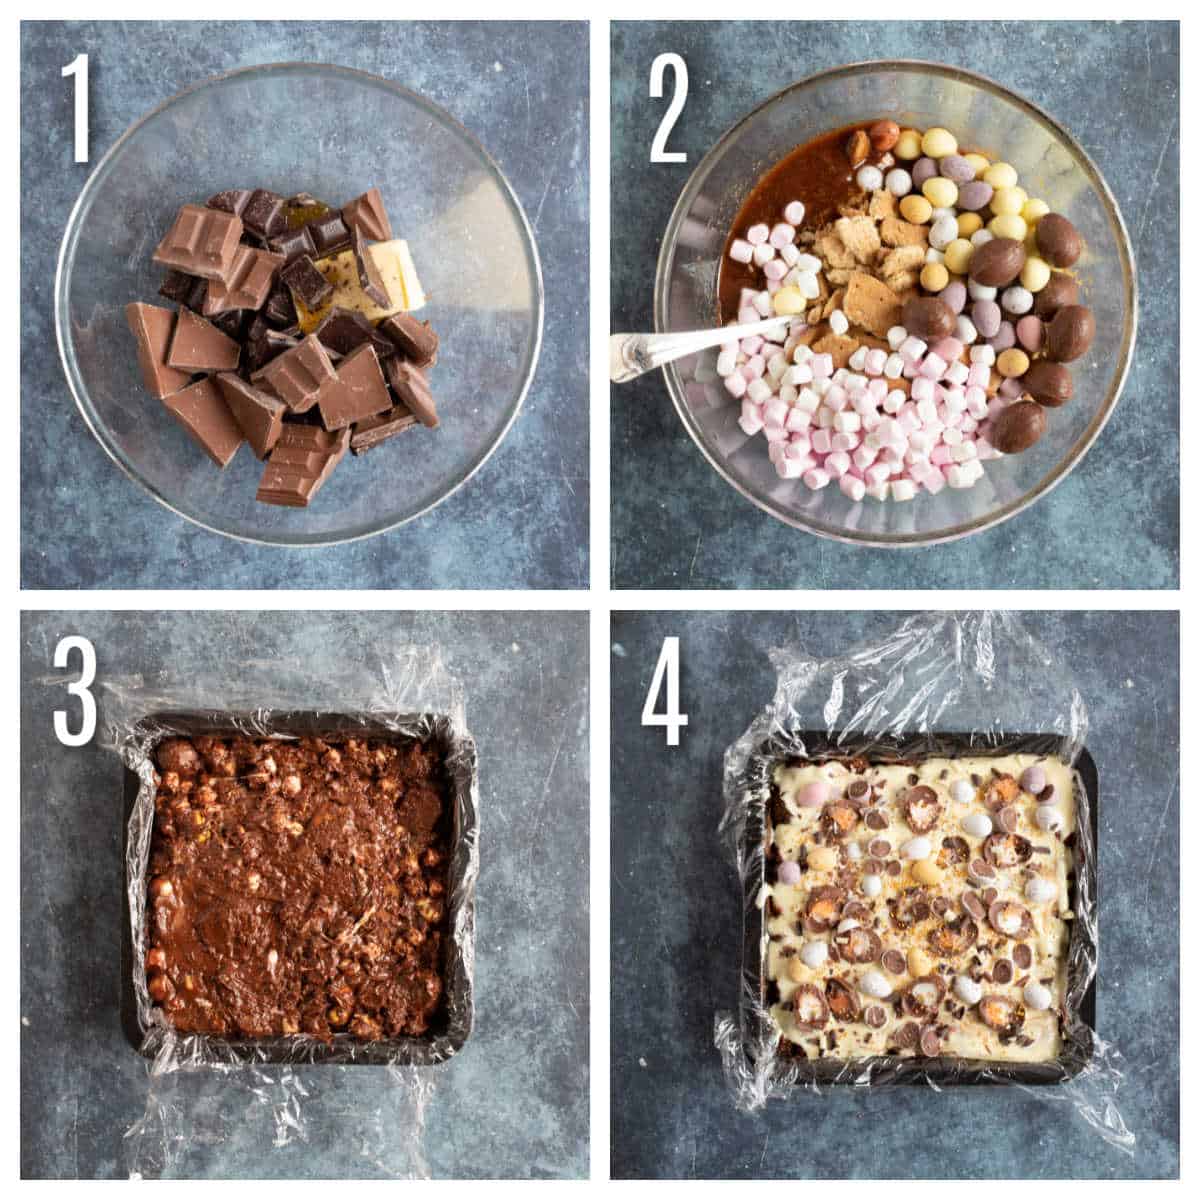 Step by step photo instructions for making Easter rocky road.